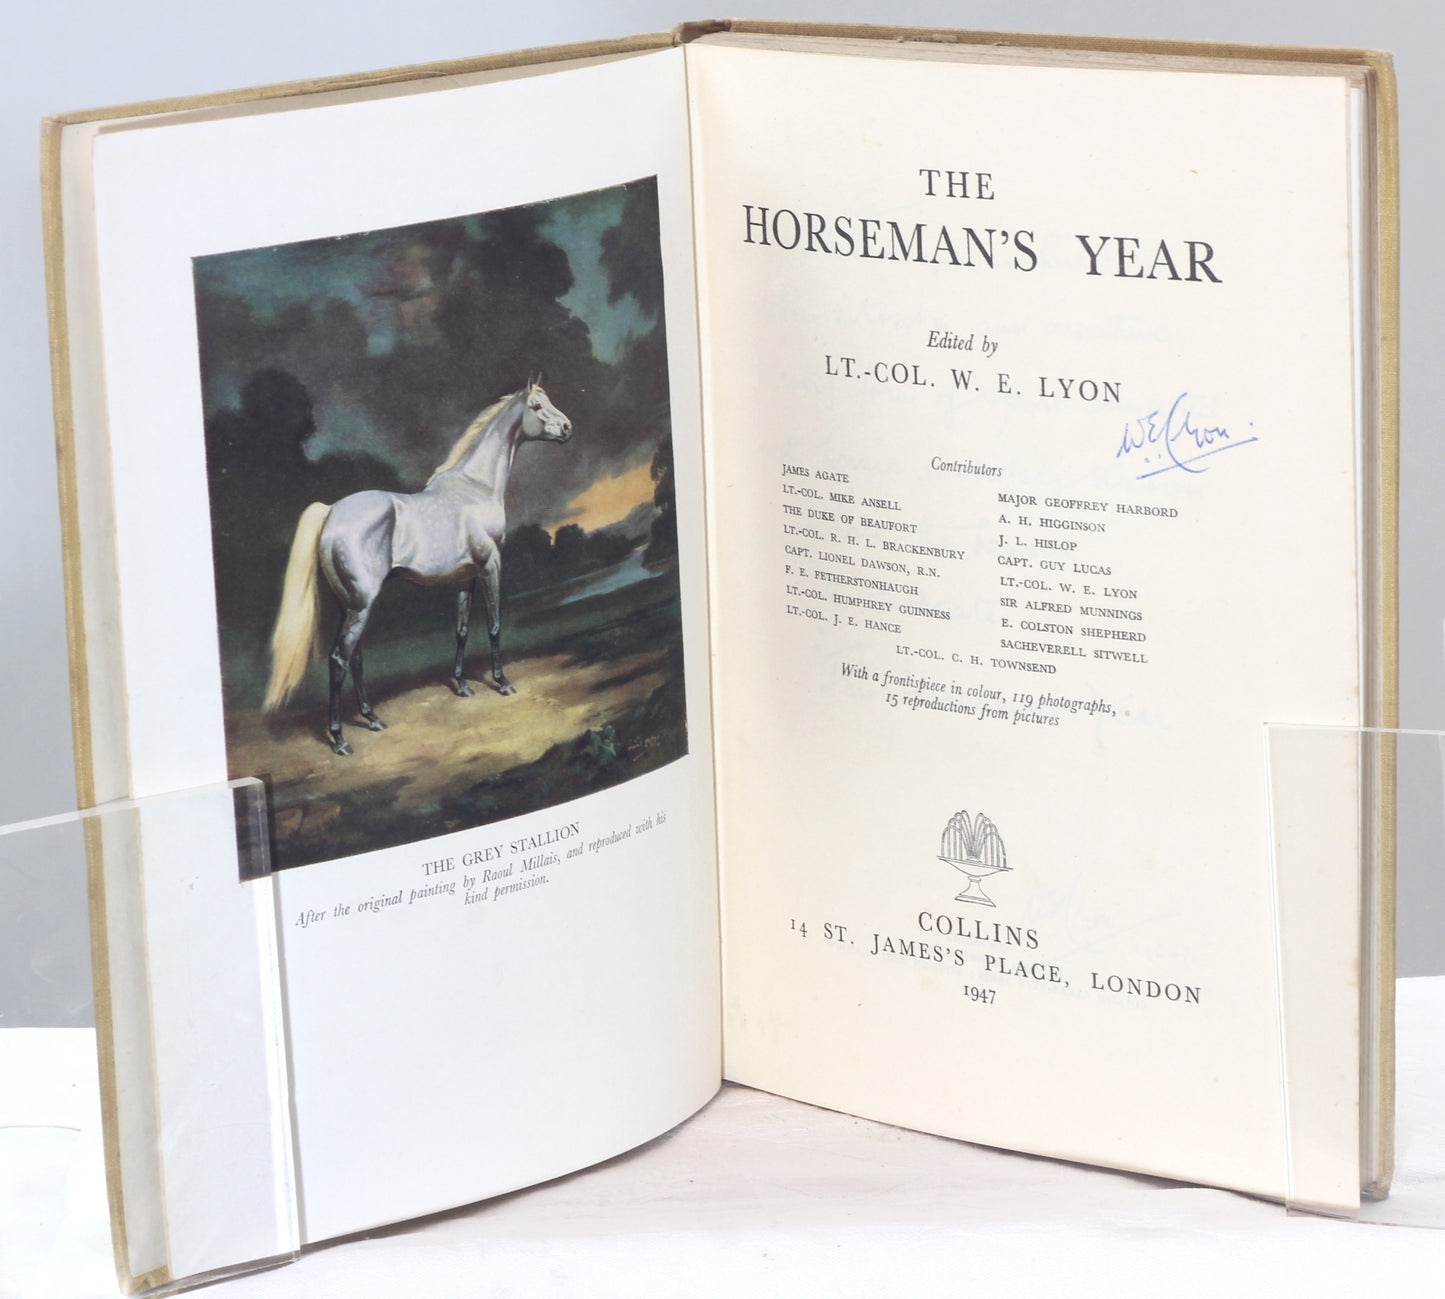 The Horseman's Year 1946-47, Edited by Lt.Col. W.E.Lyon, Signed copy